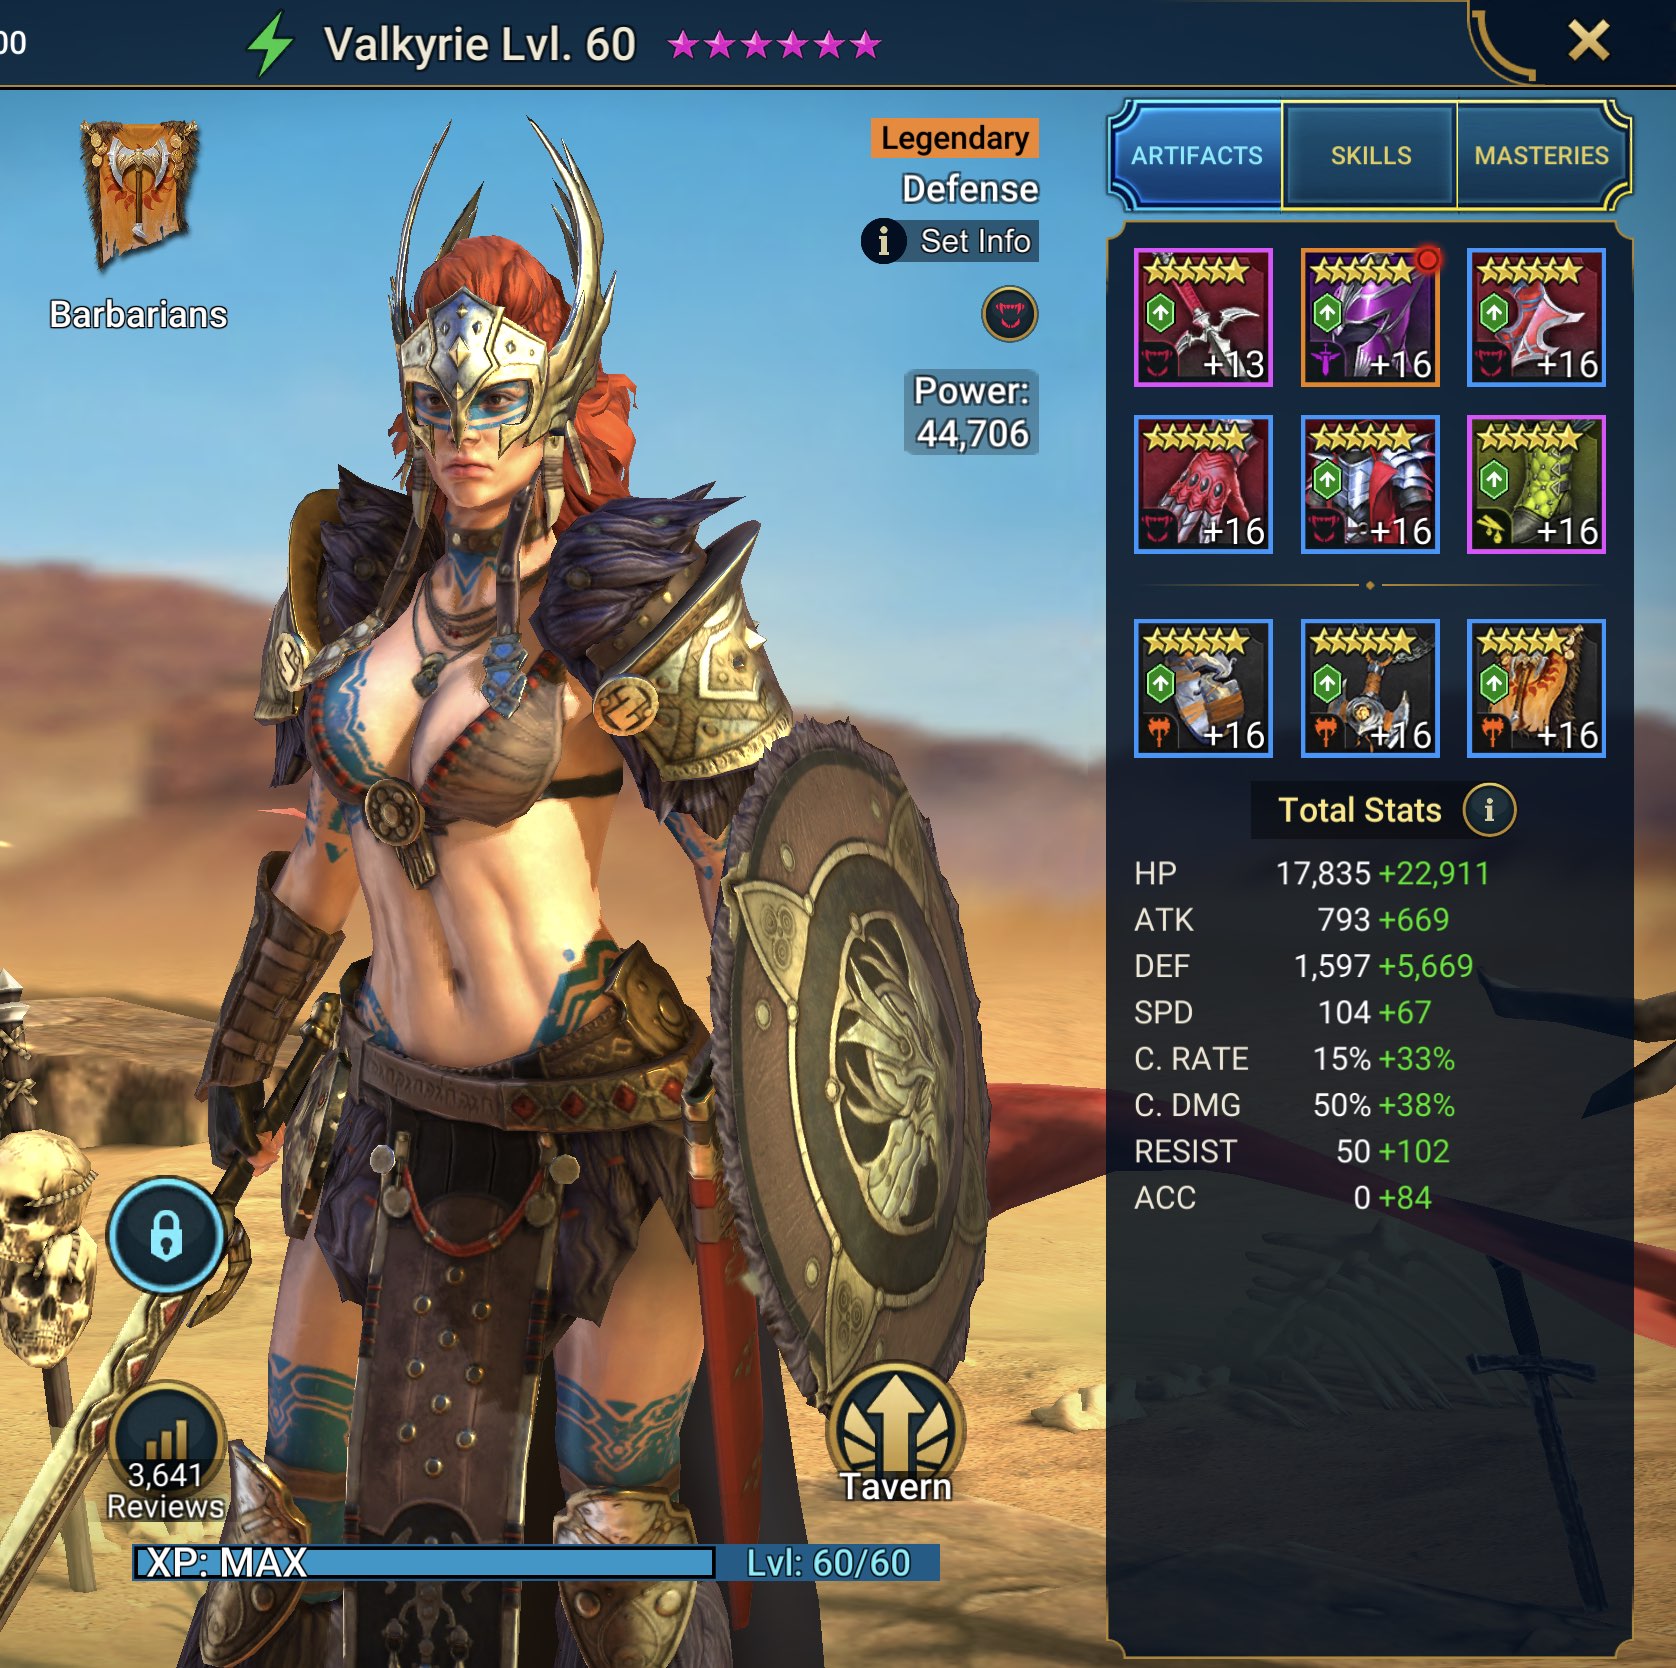 Valkyrie build for late game